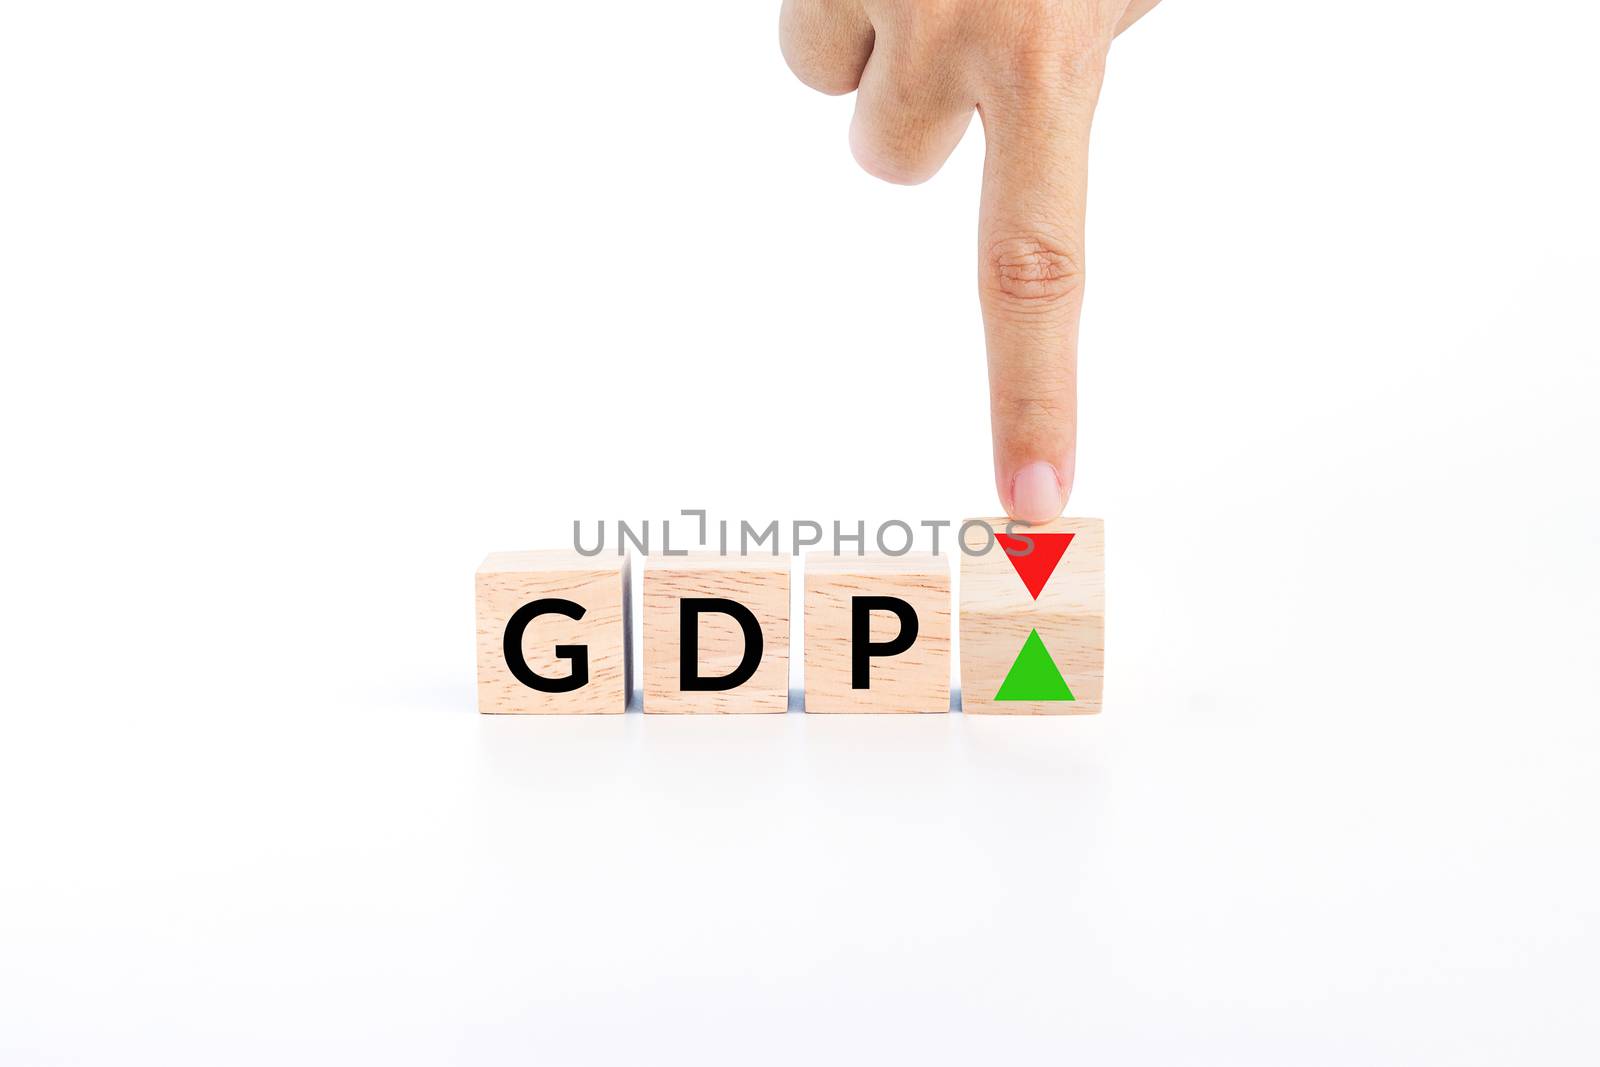 hand flip wooden cube to changes the direction of an arrow symbolizing that the GDP (gross domestic product) of a country is changing the trend and growth up instead of down by asiandelight